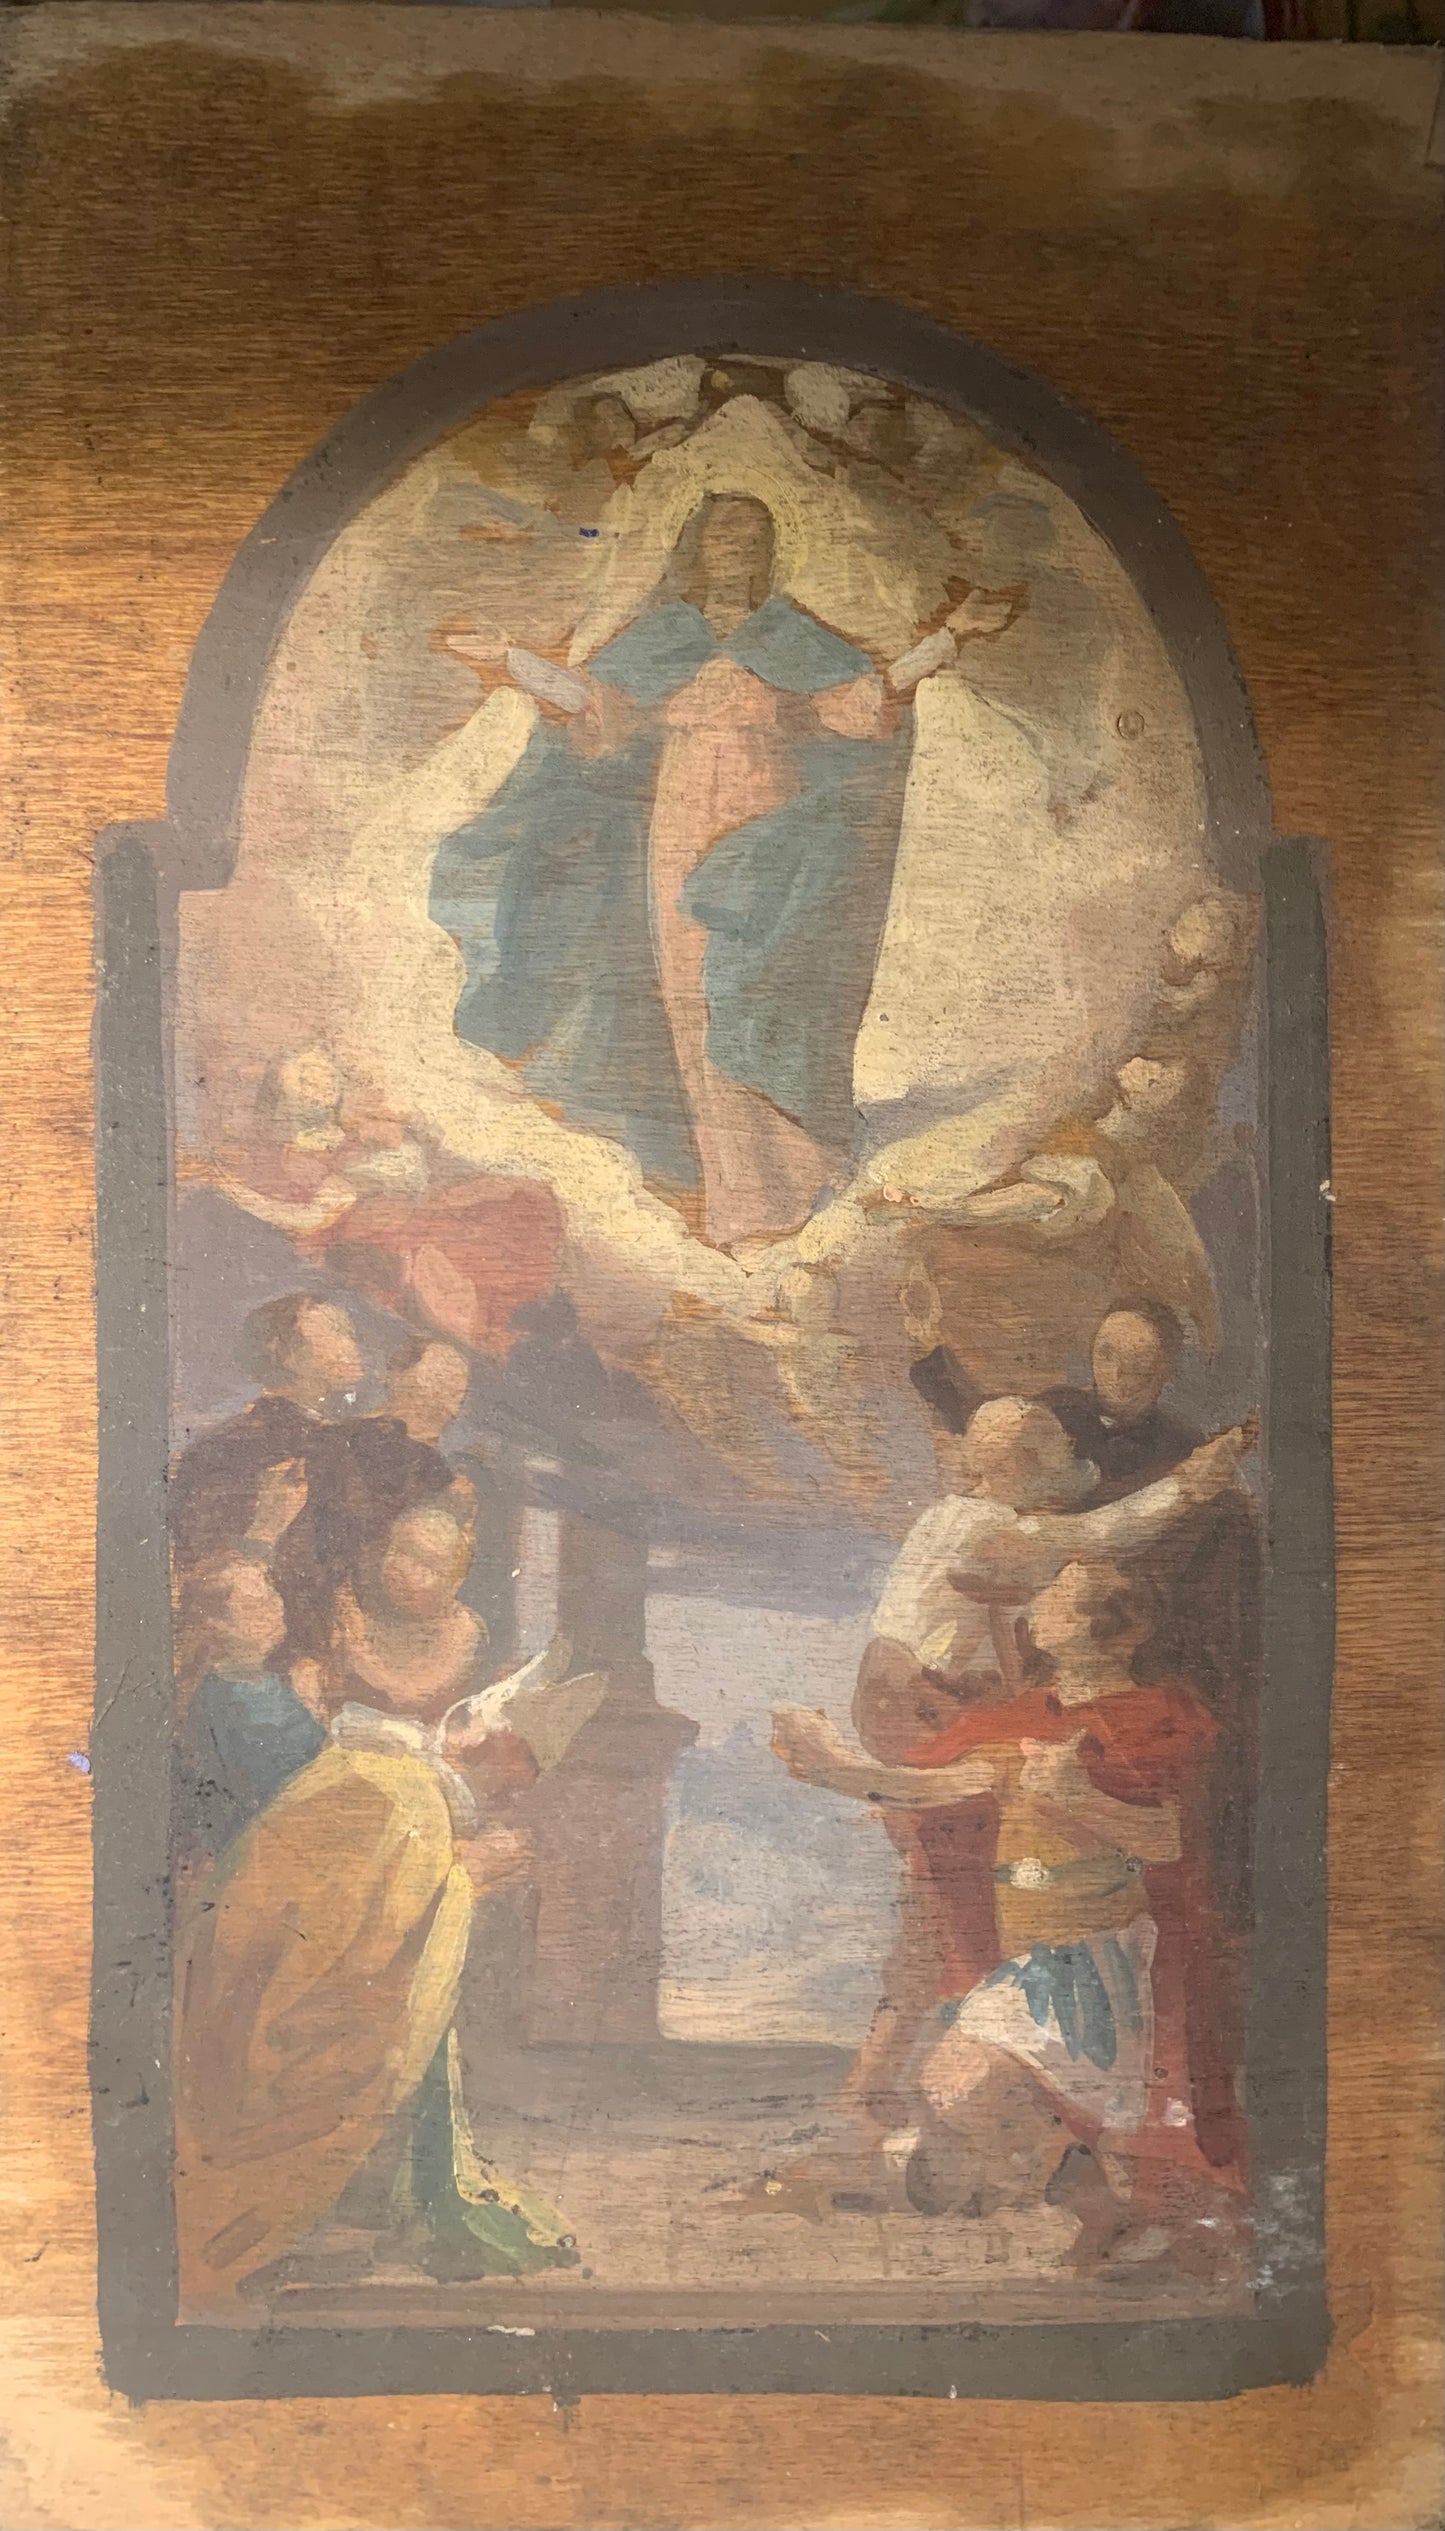 Preparatory sketch for a painting of “Assumption of Mary with Saints”.